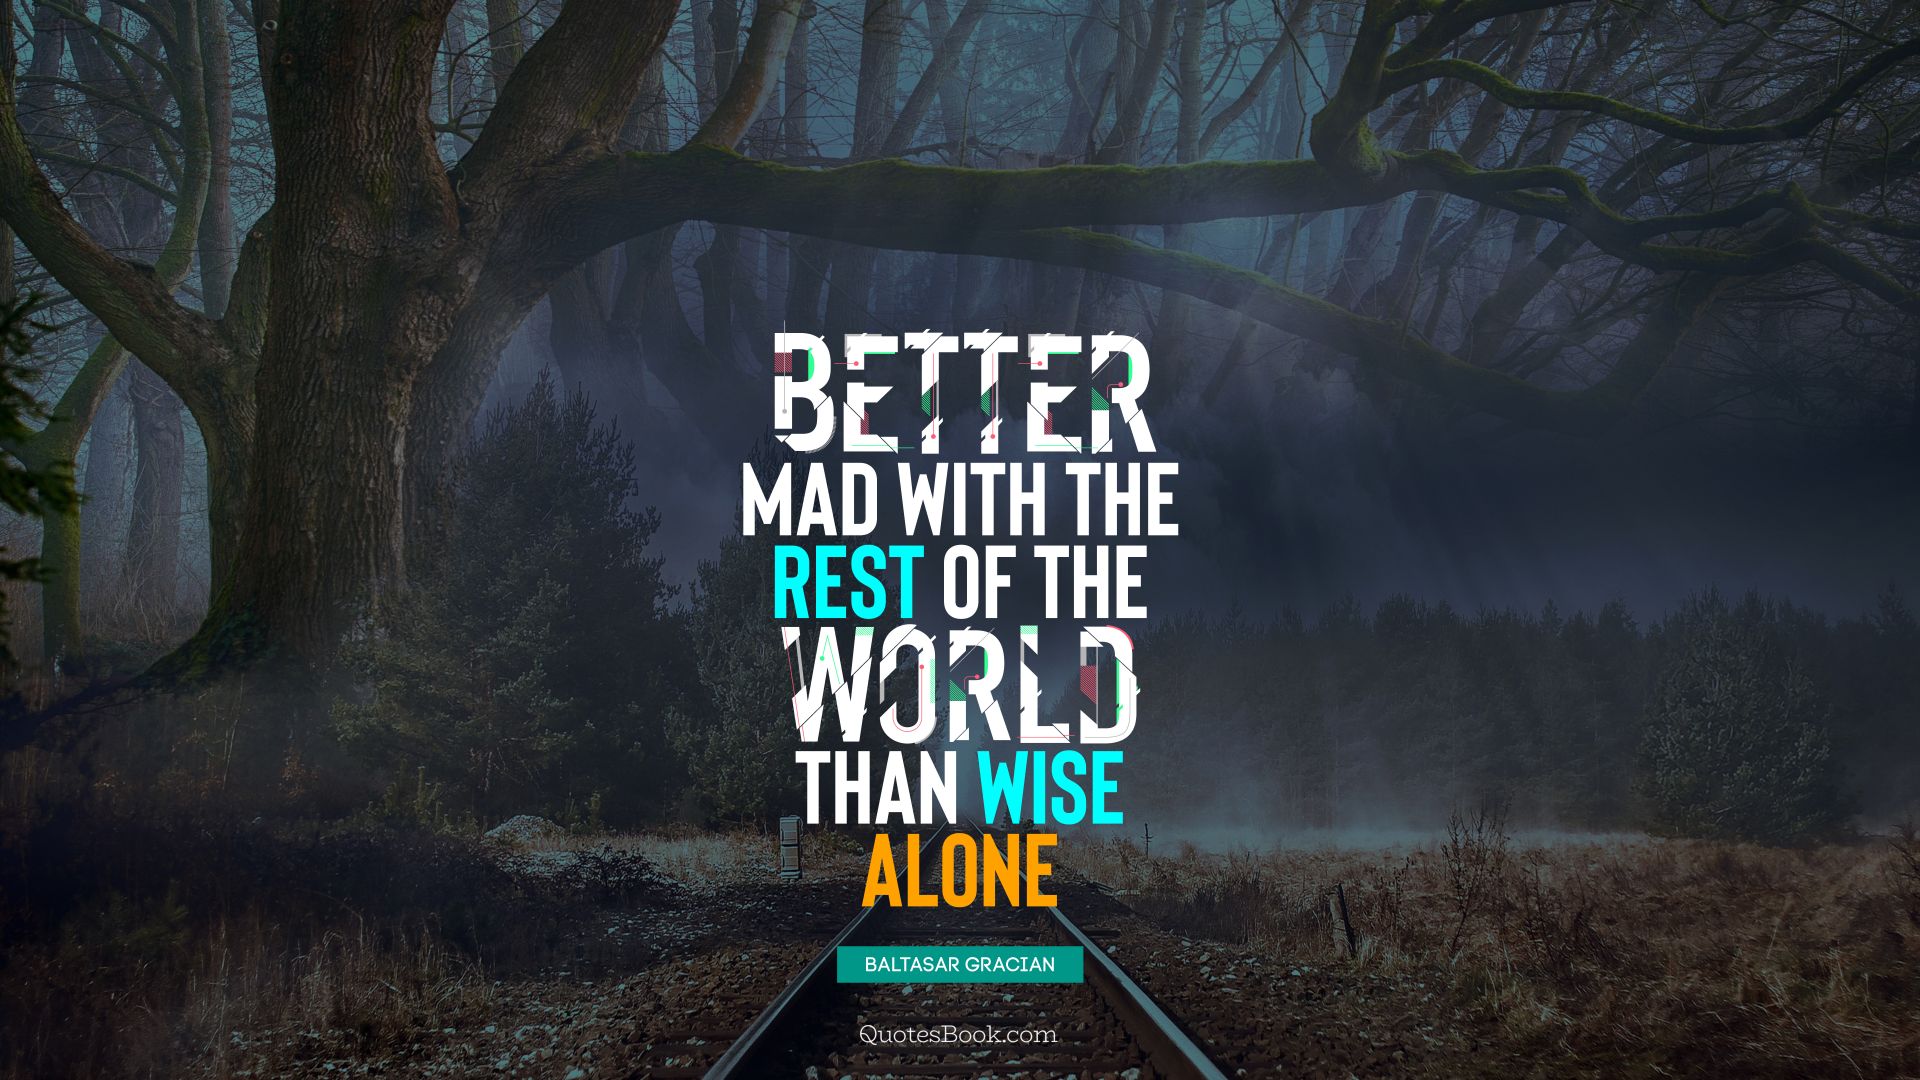 Better mad with the rest of the world than wise alone. - Quote by Baltasar Gracian